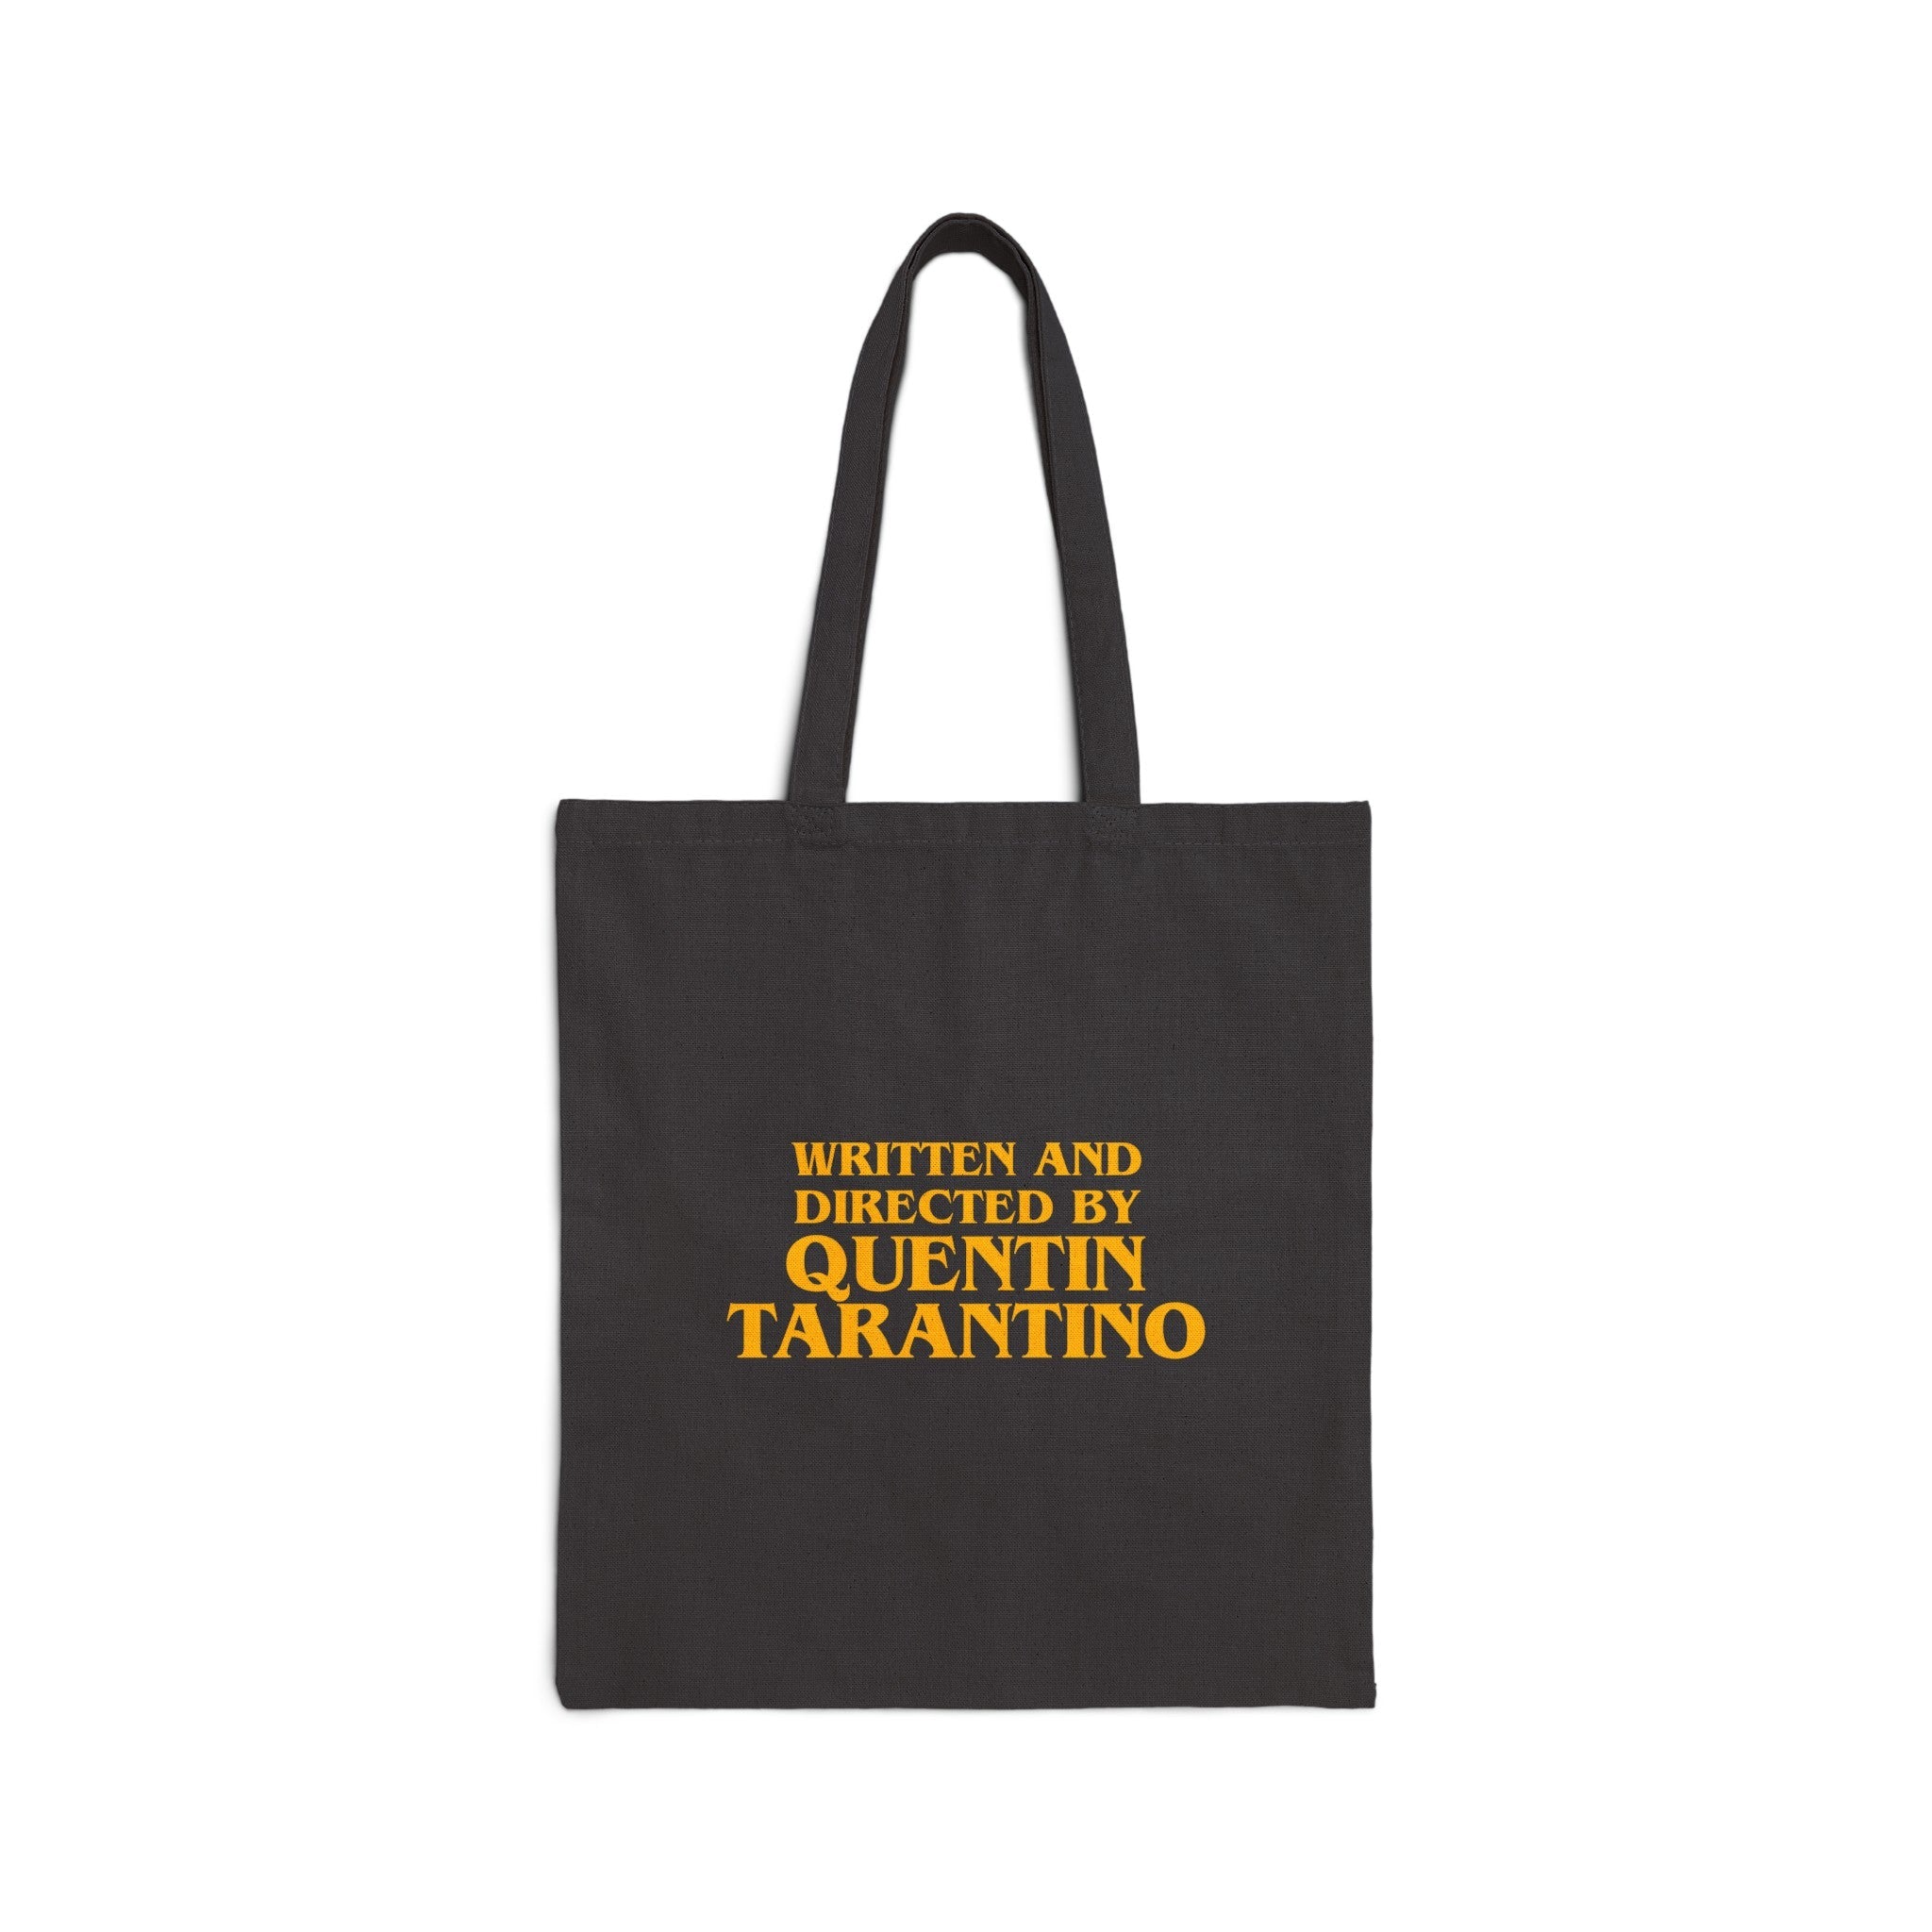 Written And Directed By Quentin Tarantino - Tote Bag